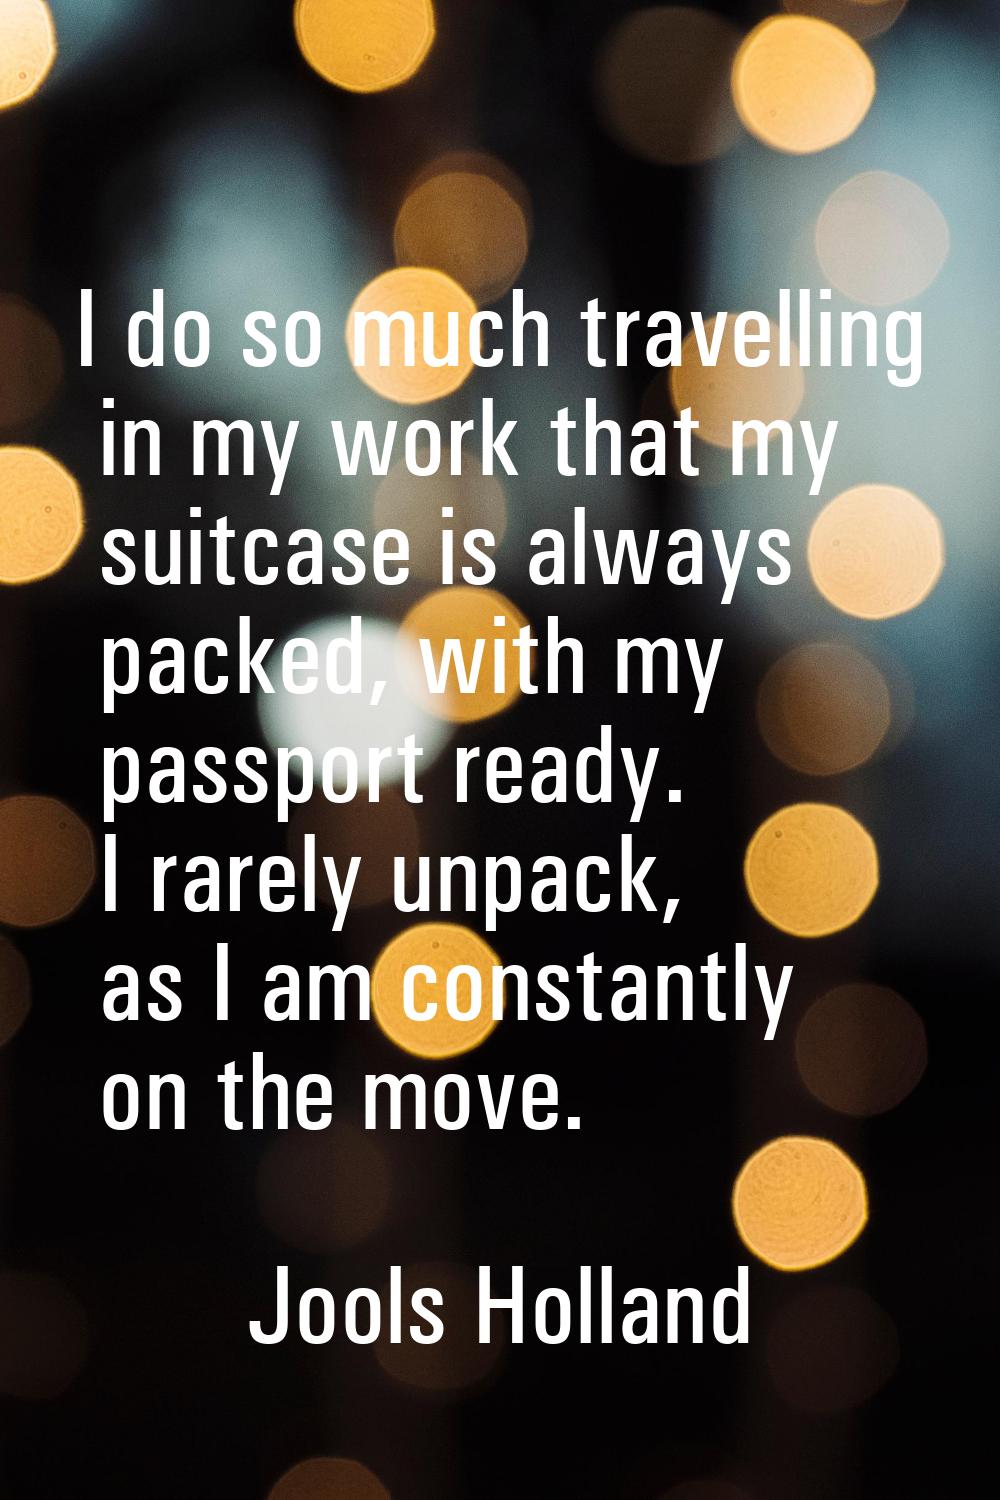 I do so much travelling in my work that my suitcase is always packed, with my passport ready. I rar